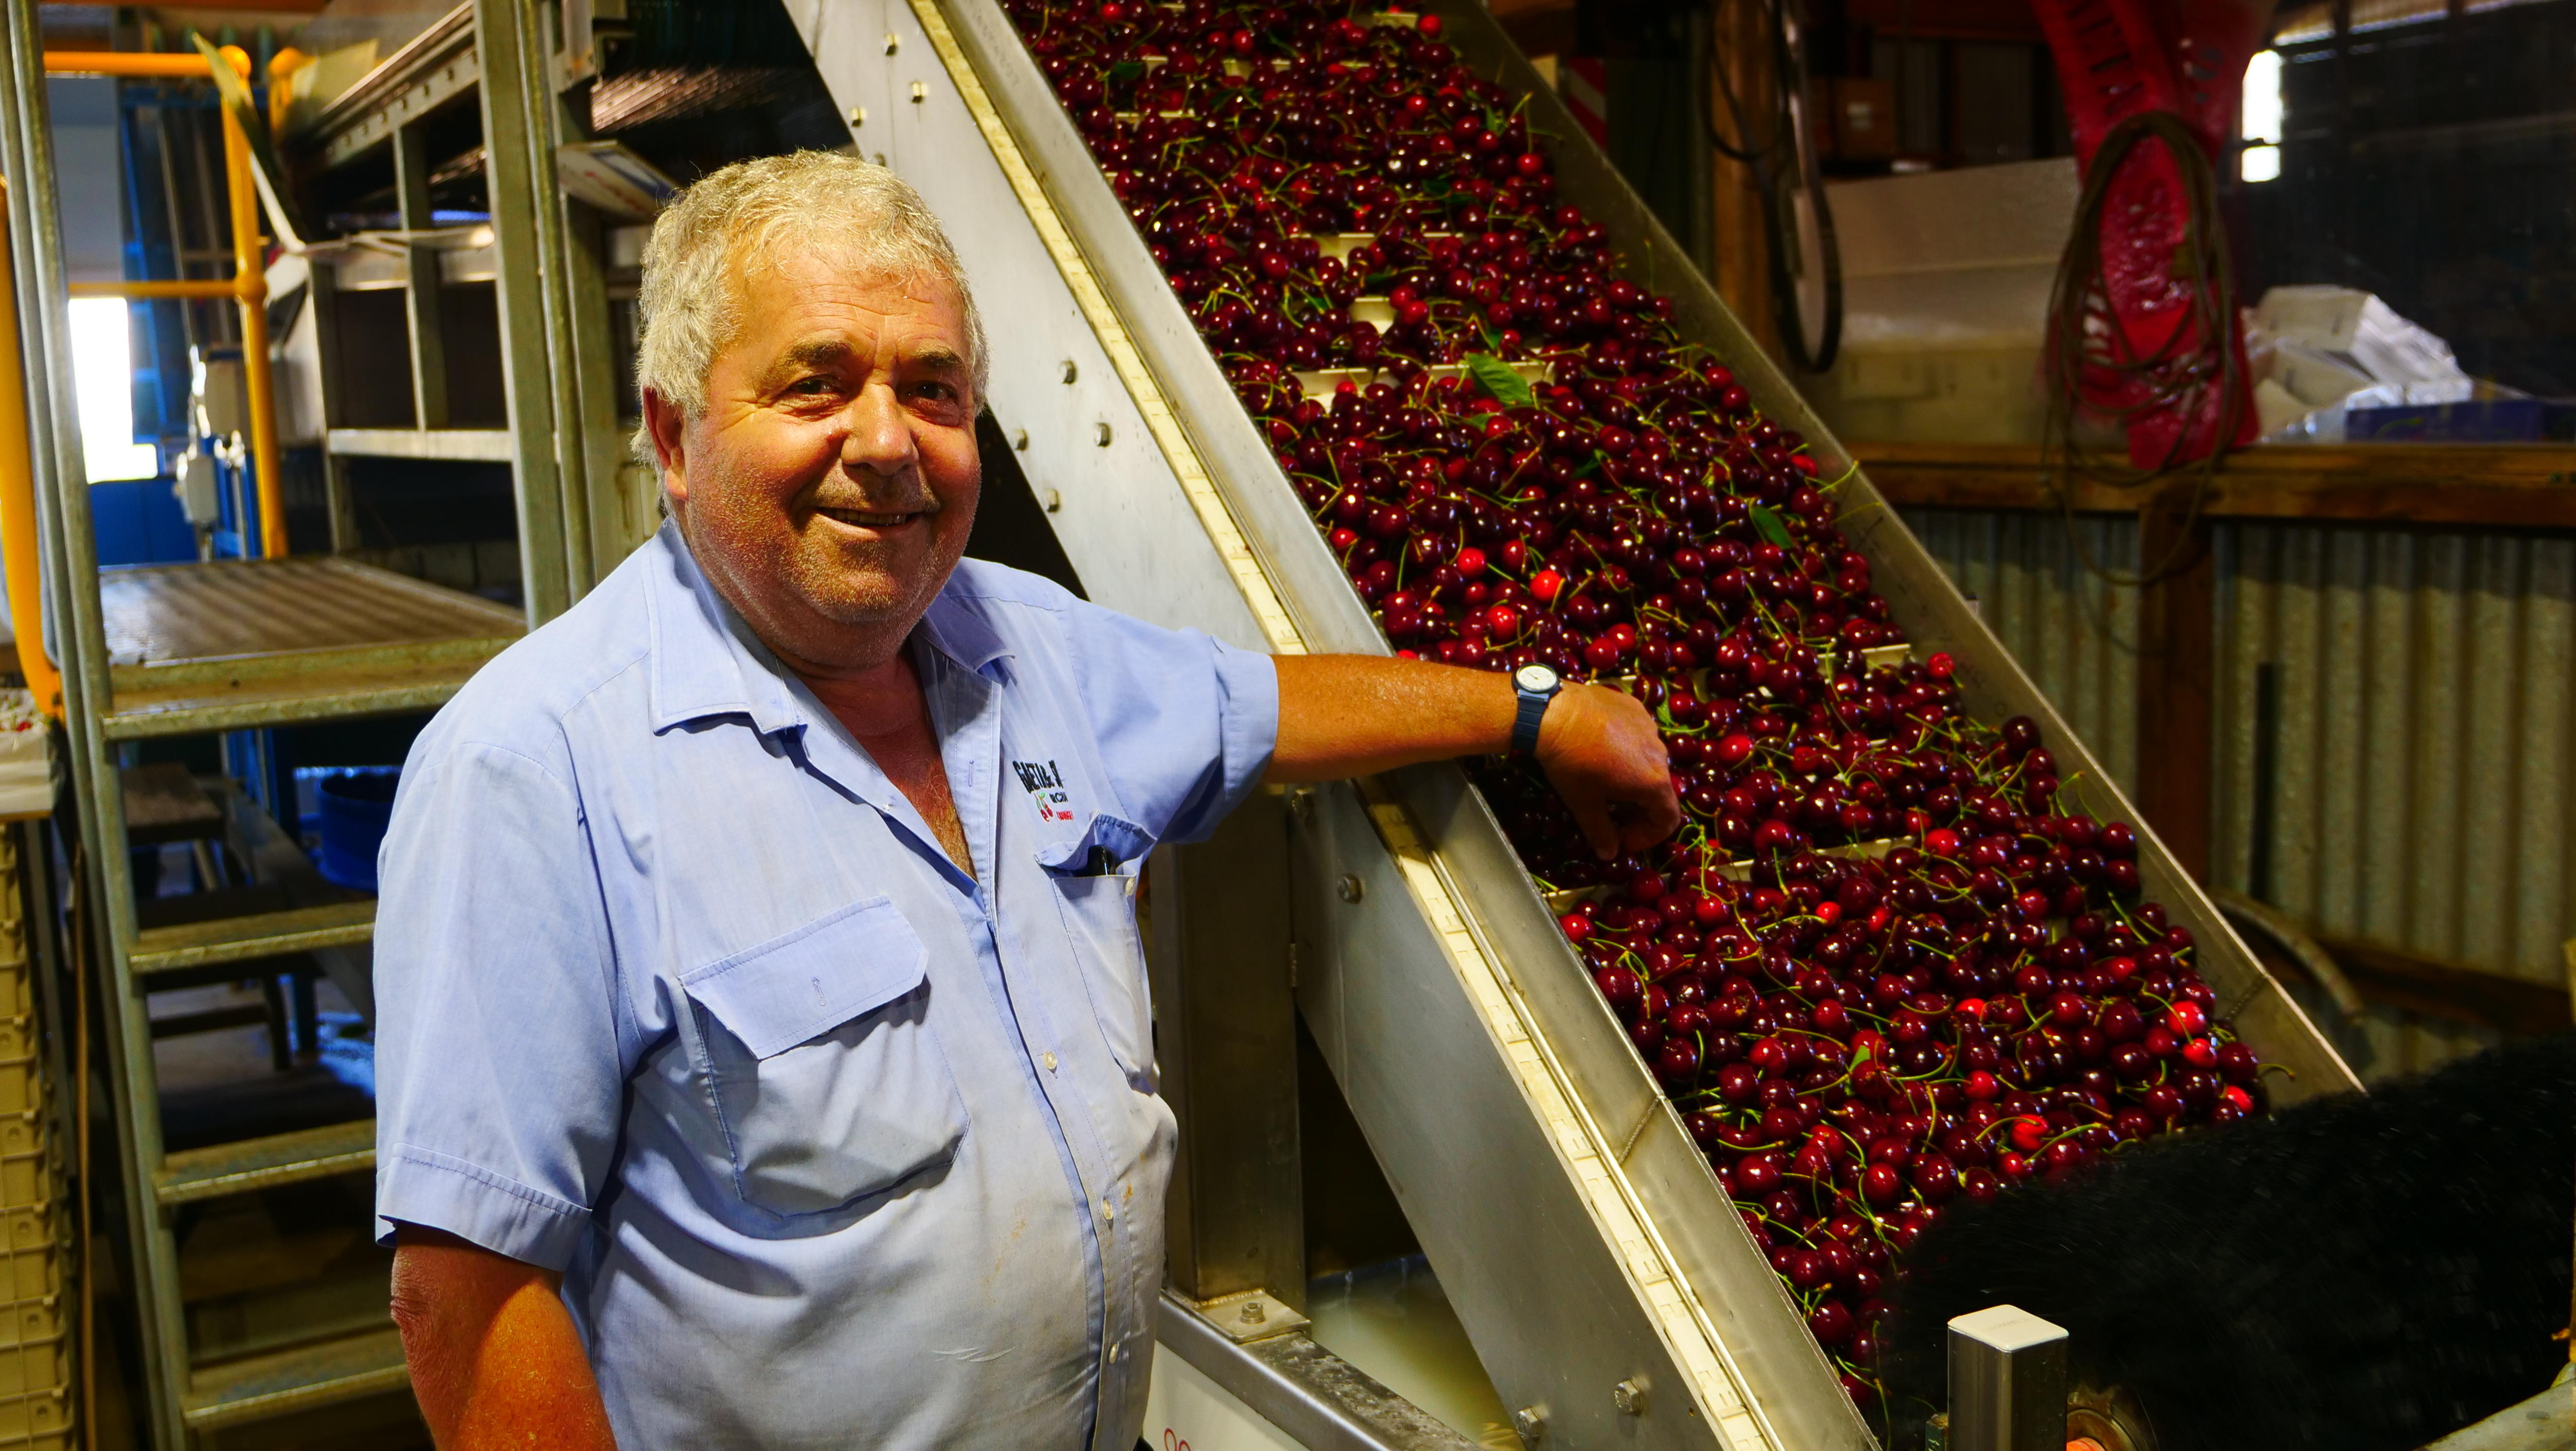 A man in a blue shirt standing next to some cherries